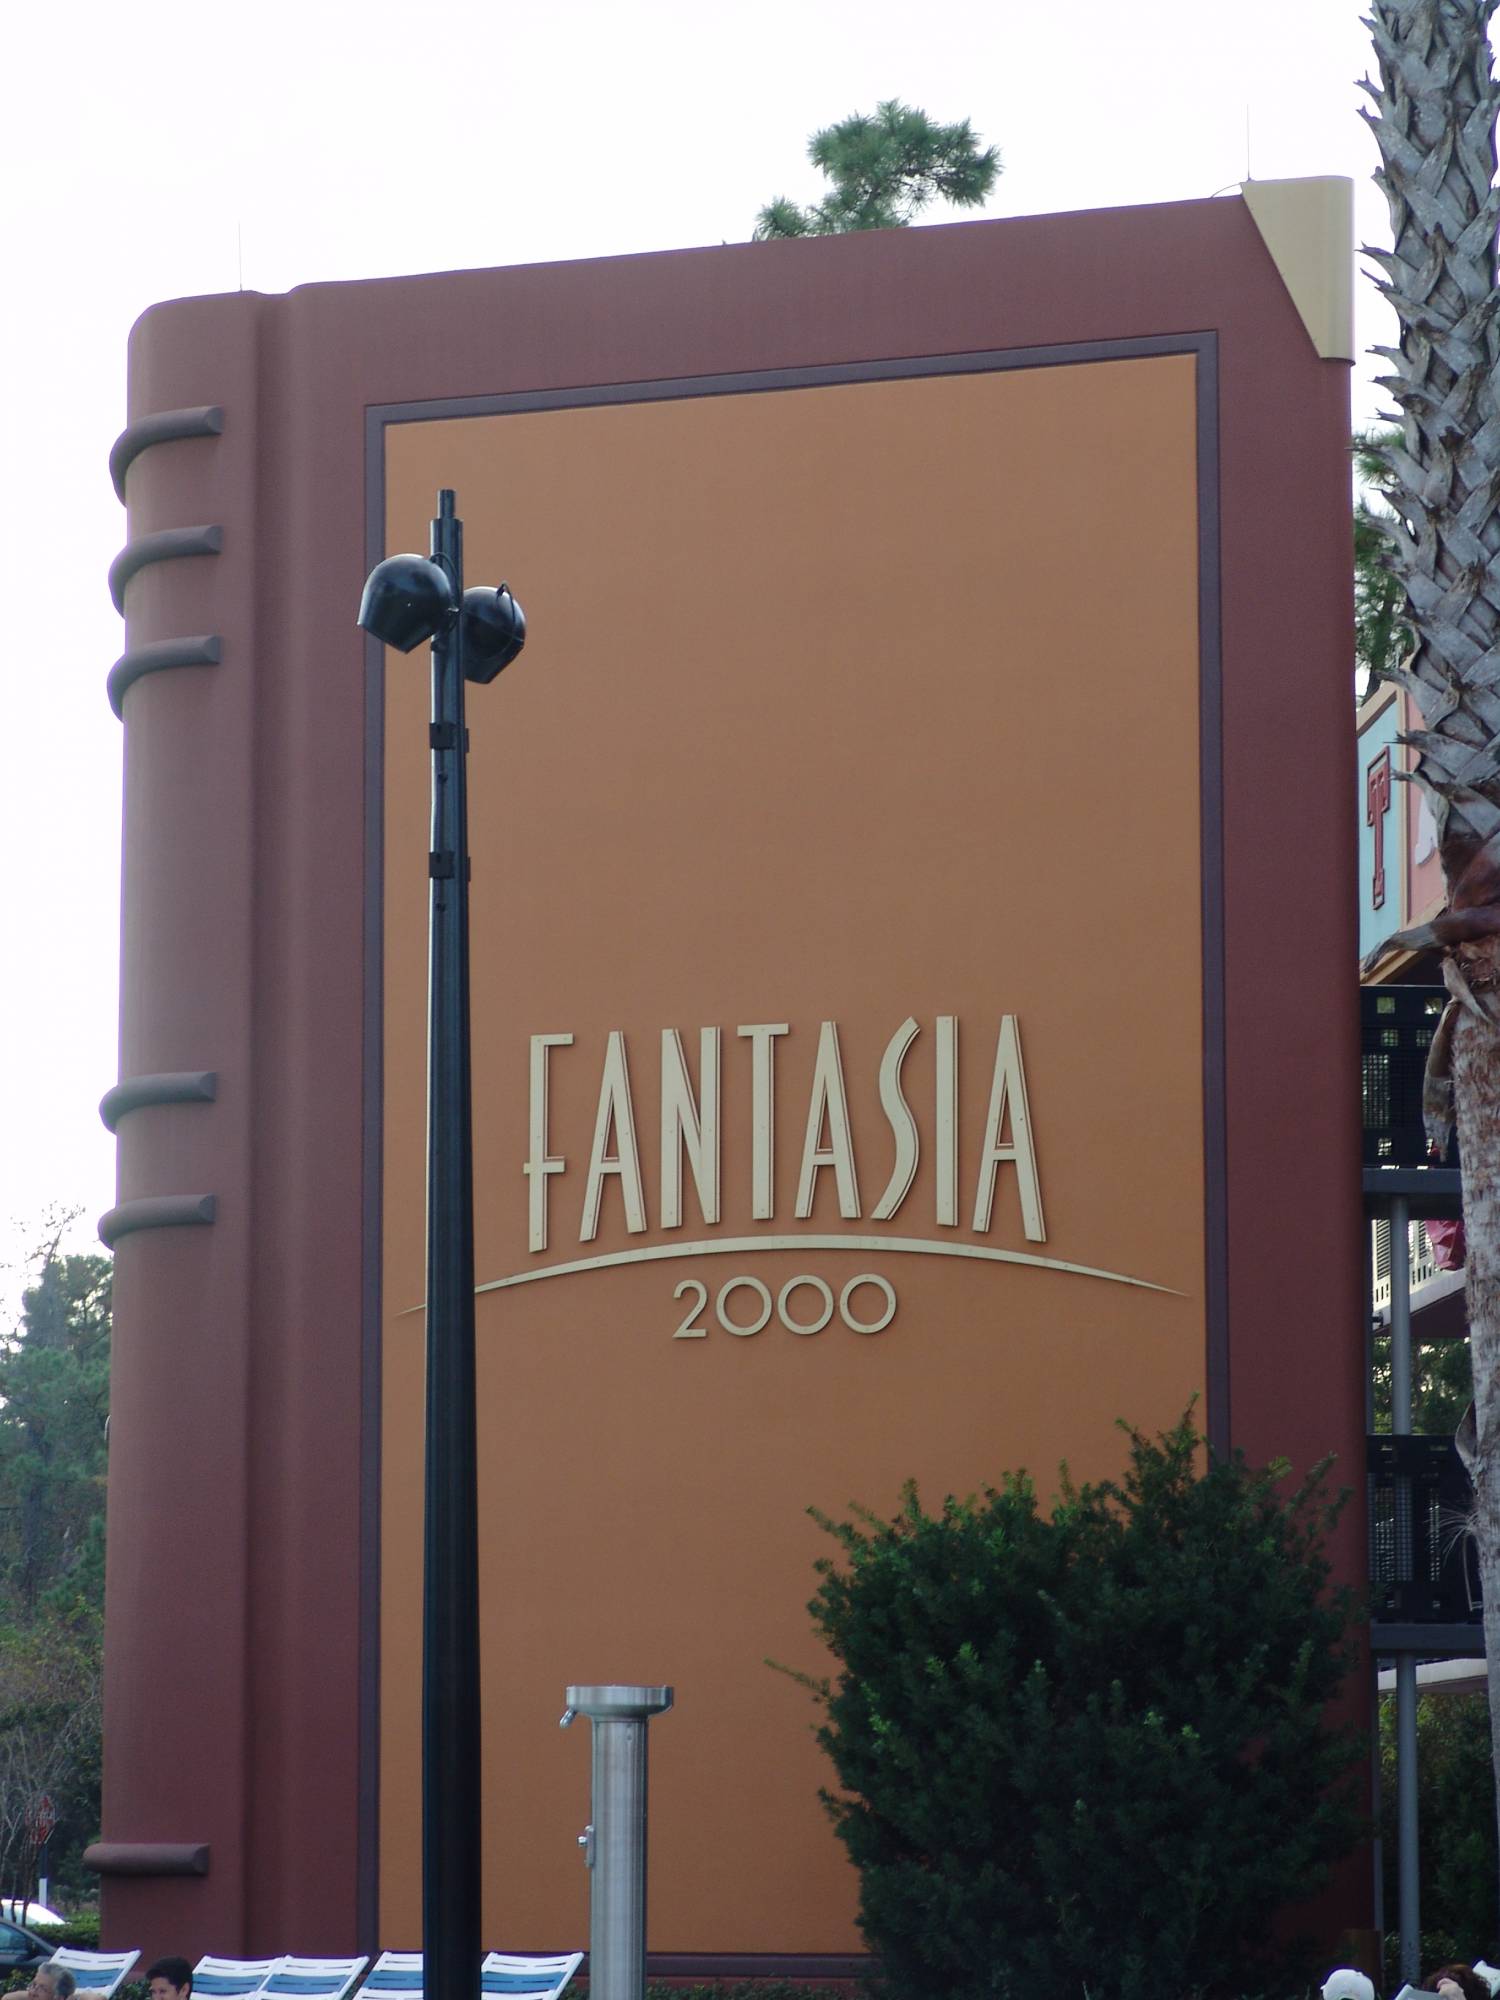 All Star Movies - Fantasia building book